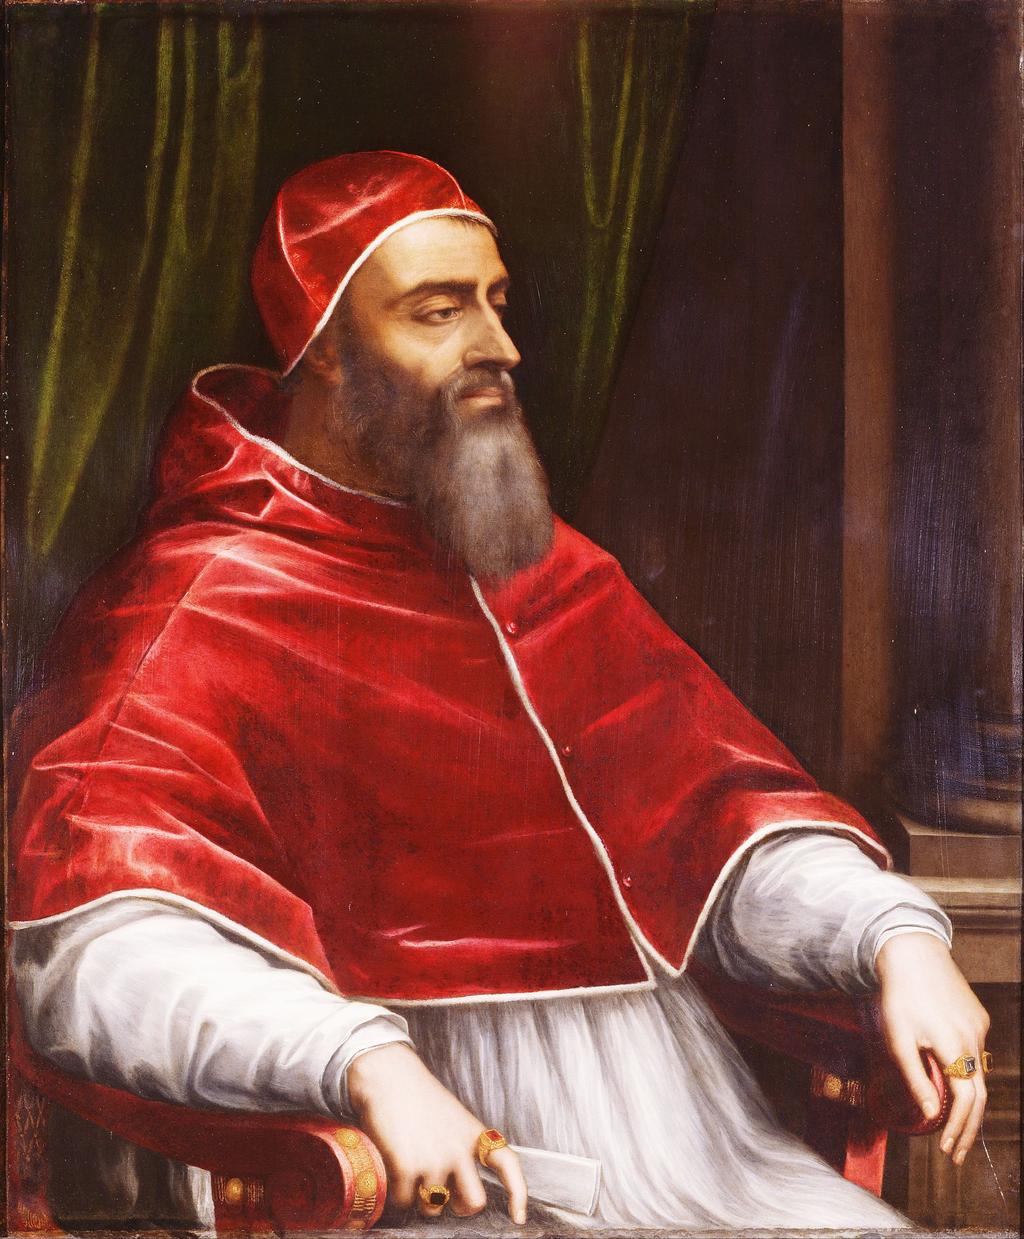 Pope Clement VII Catherine of Aragon was the aunt of the King of Spain, Charles V Henry VIII of